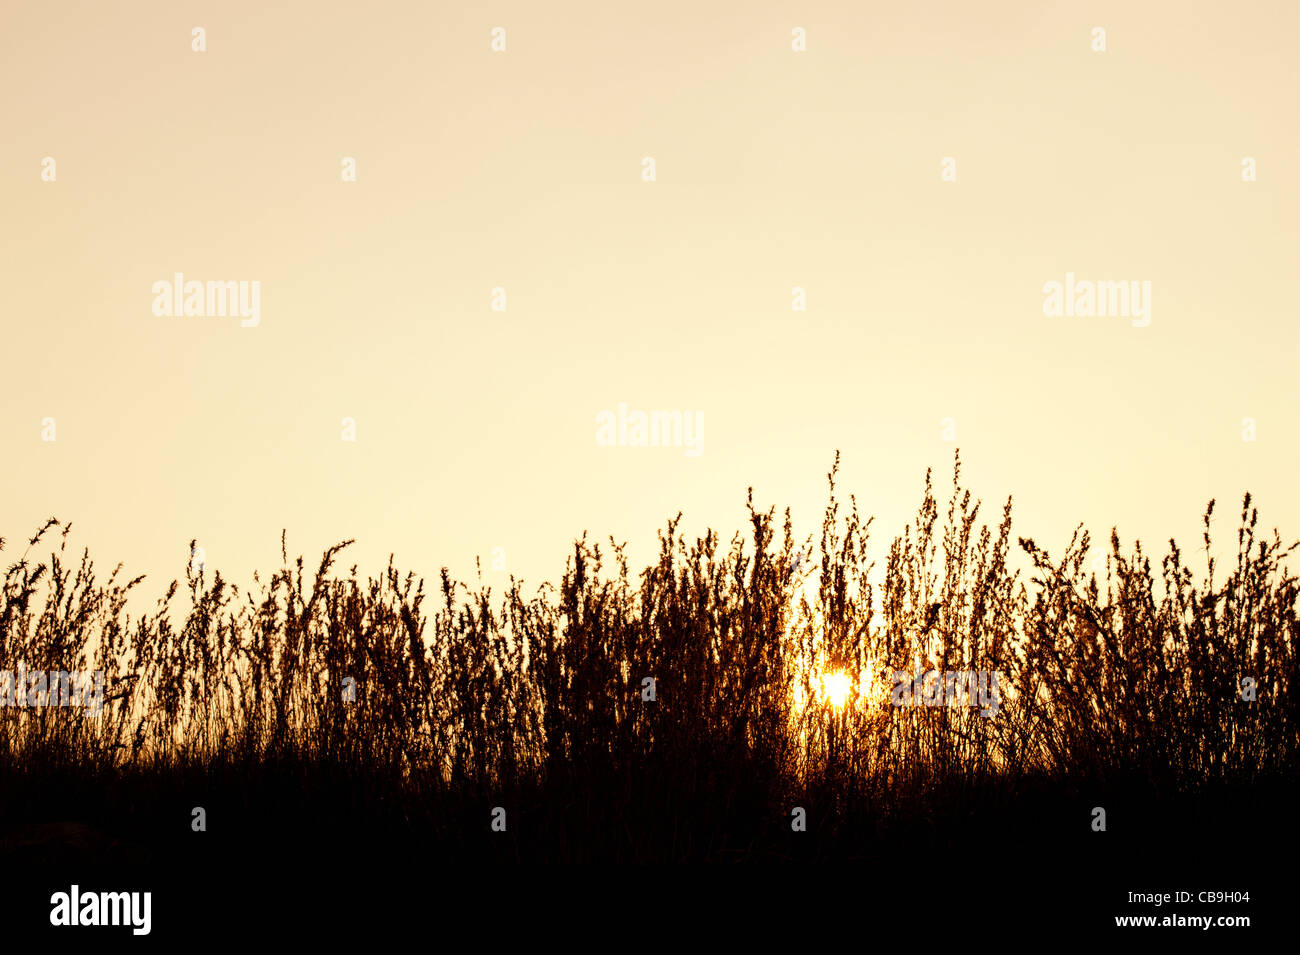 Indian grasses in the countryside at sunset. Andhra Pradesh, India. Silhouette Stock Photo